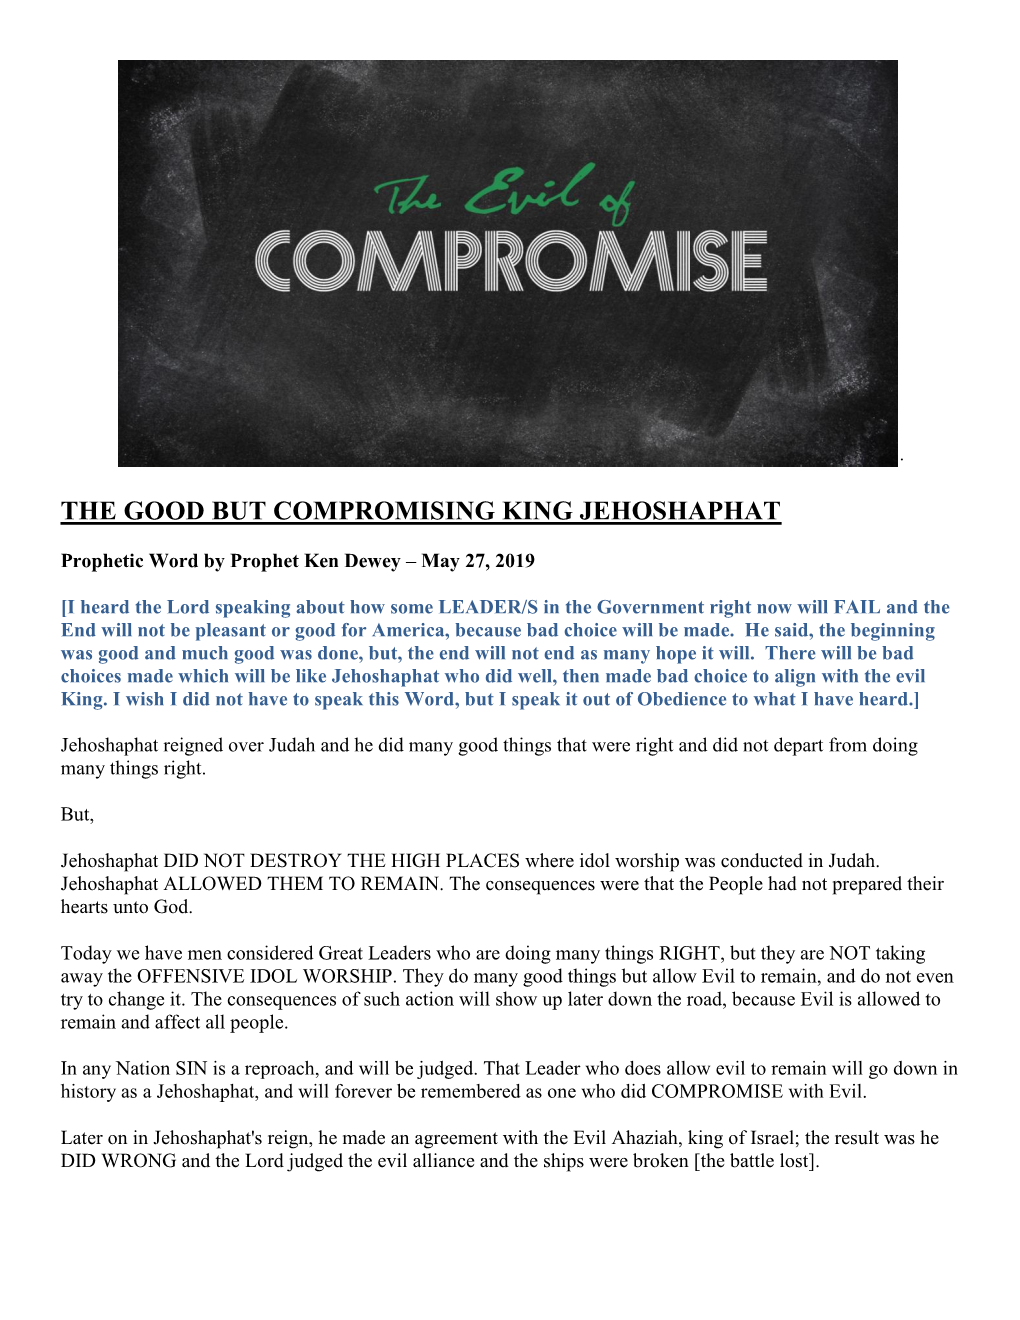 The Good but Compromising King Jehoshaphat